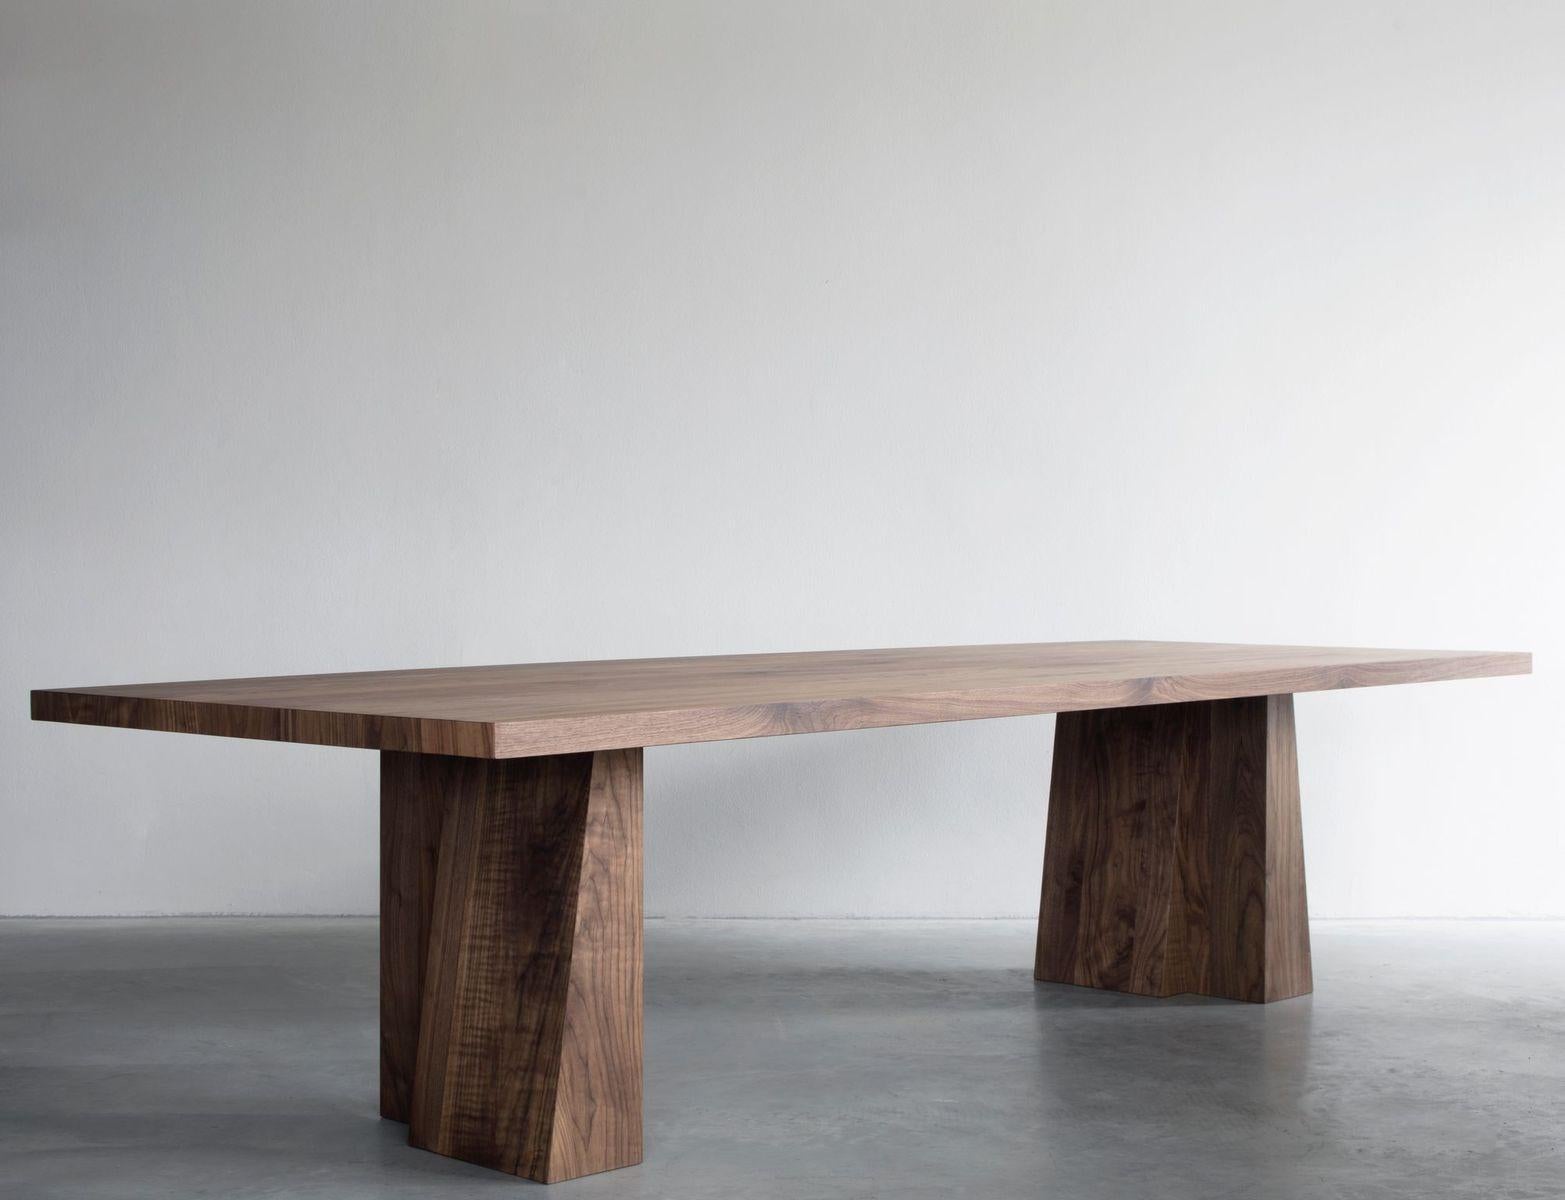 Eli dining table by Van Rossum
Dimensions: D260 x W110 x H74 cm
Materials: Walnut.

The wood is available in all standard Van Rossum colors, or in a matching finish to customer’s own sample.

Van Rossum oak or walnut table with two pairs of